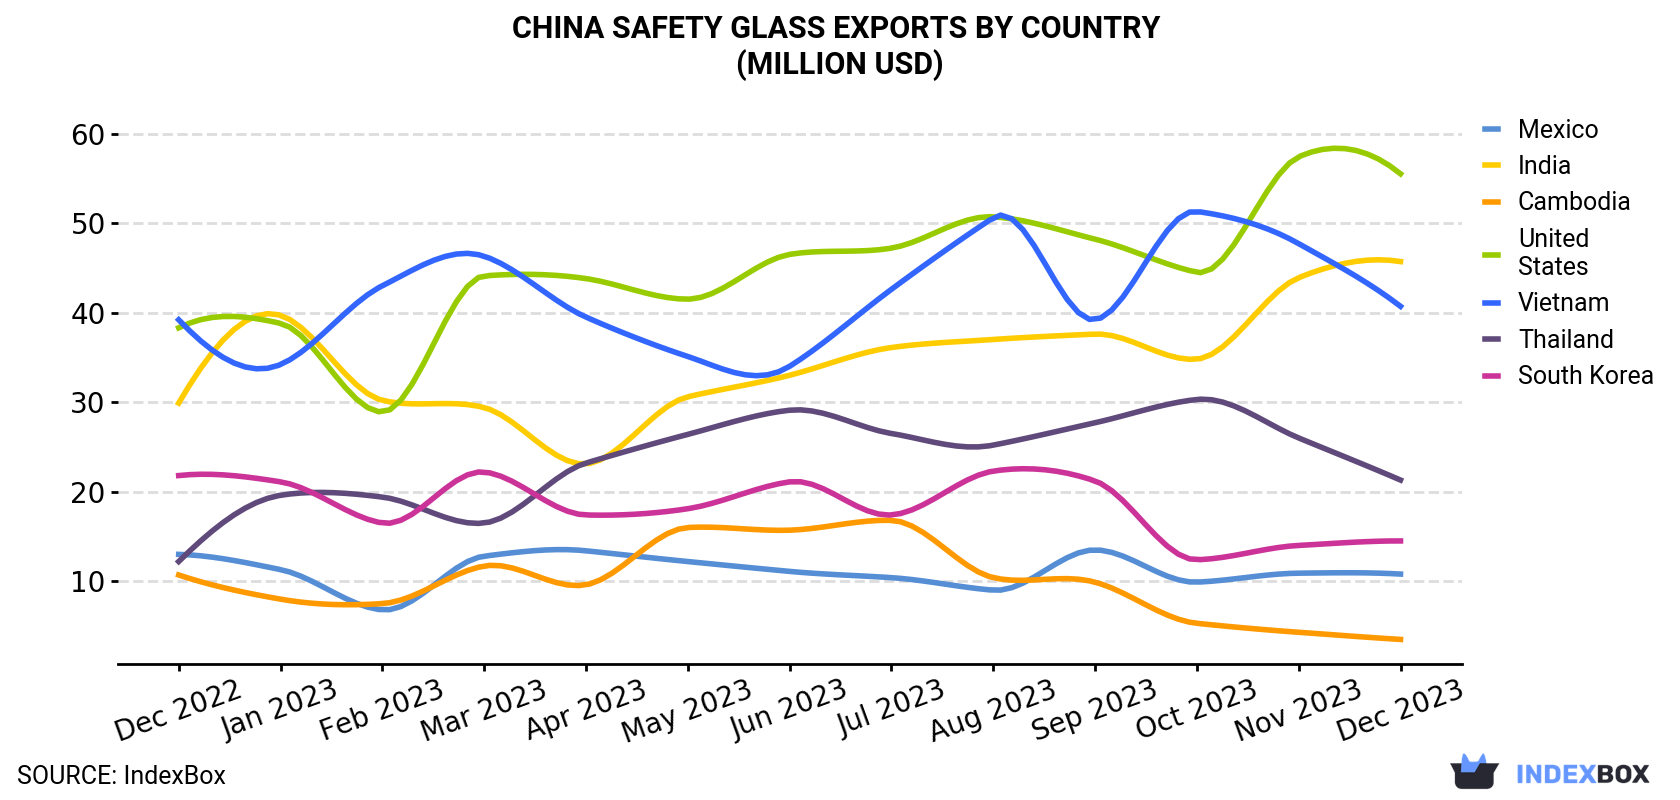 China Safety Glass Exports By Country (Million USD)